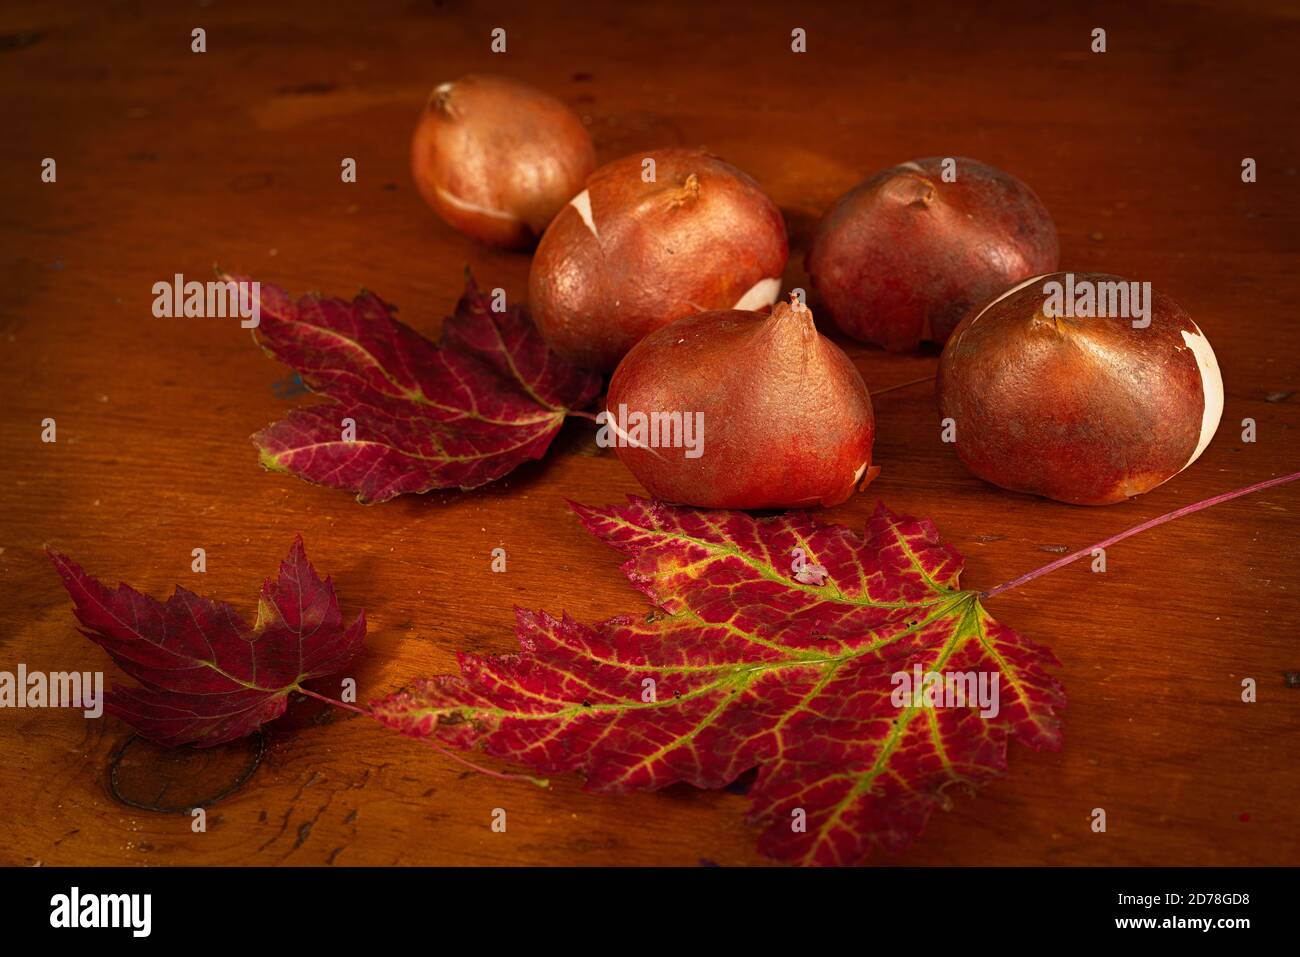 Tulip bulbs with fall maple leaves on a wooden table. Stock Photo